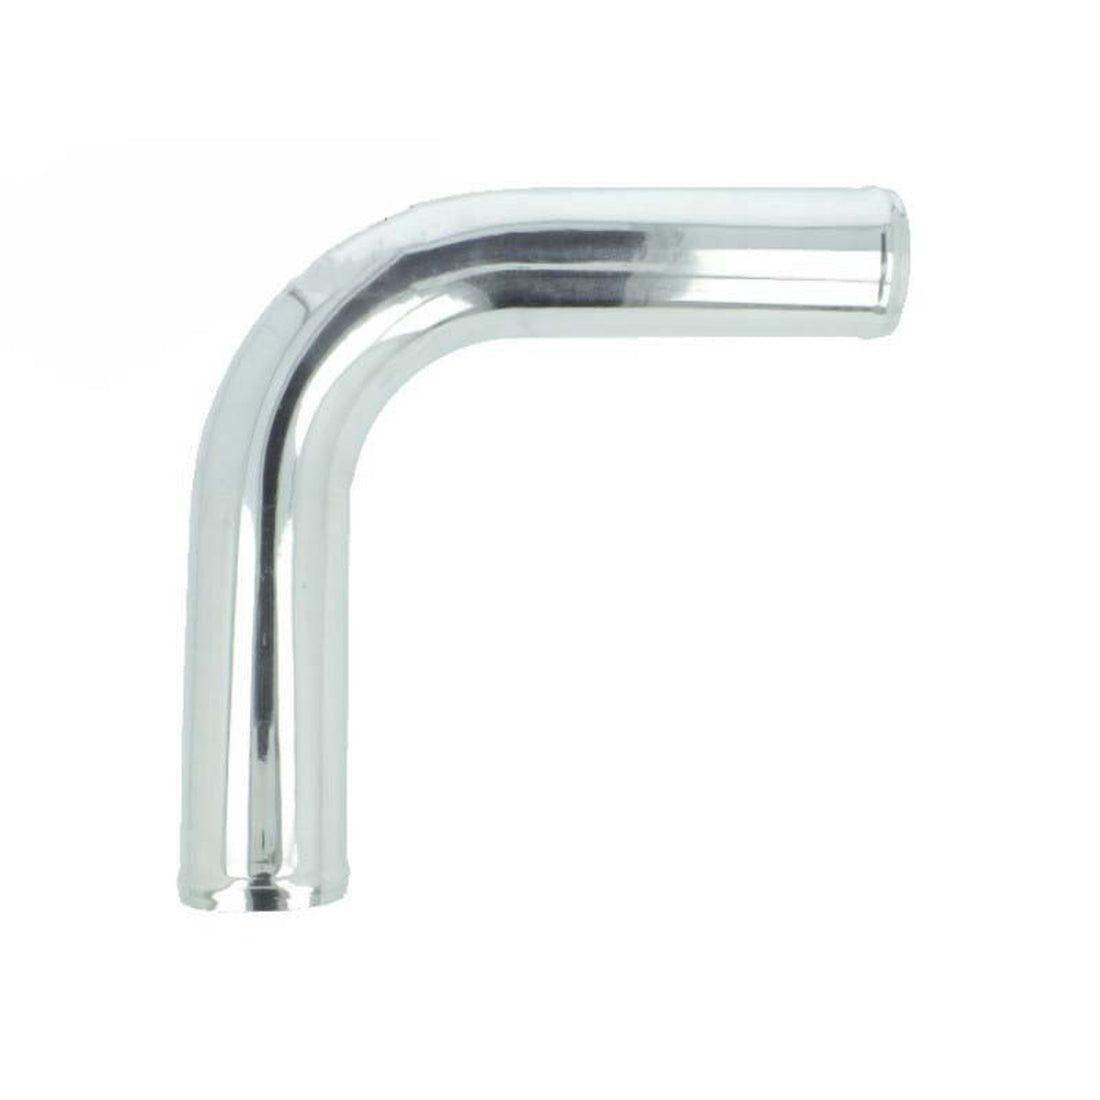 BOOST Products Aluminum Elbow 90 Degrees with 1-1/2" OD, Mandrel Bent, Polished